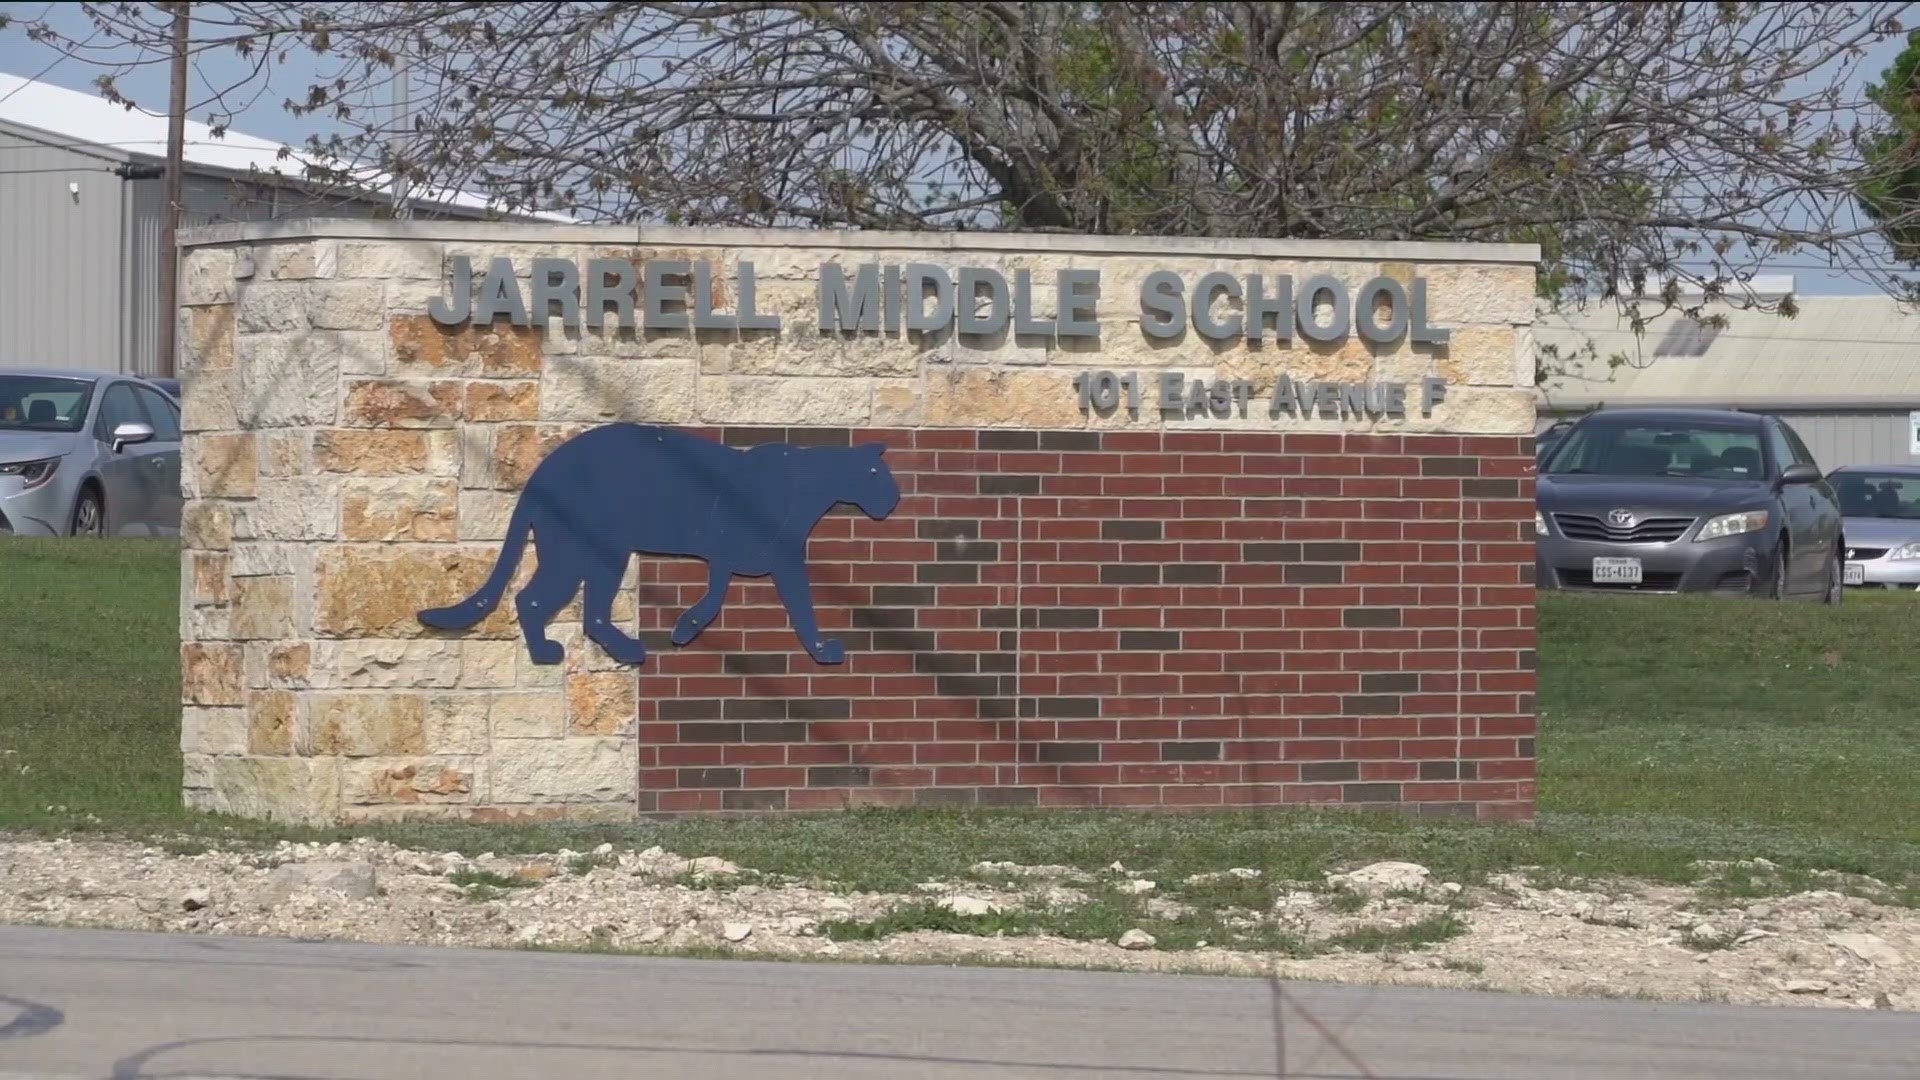 Districts in Central Texas were dealing with threats that put parents and students on alert. Over 100 Jarrell Middle School students stayed home on Monday.